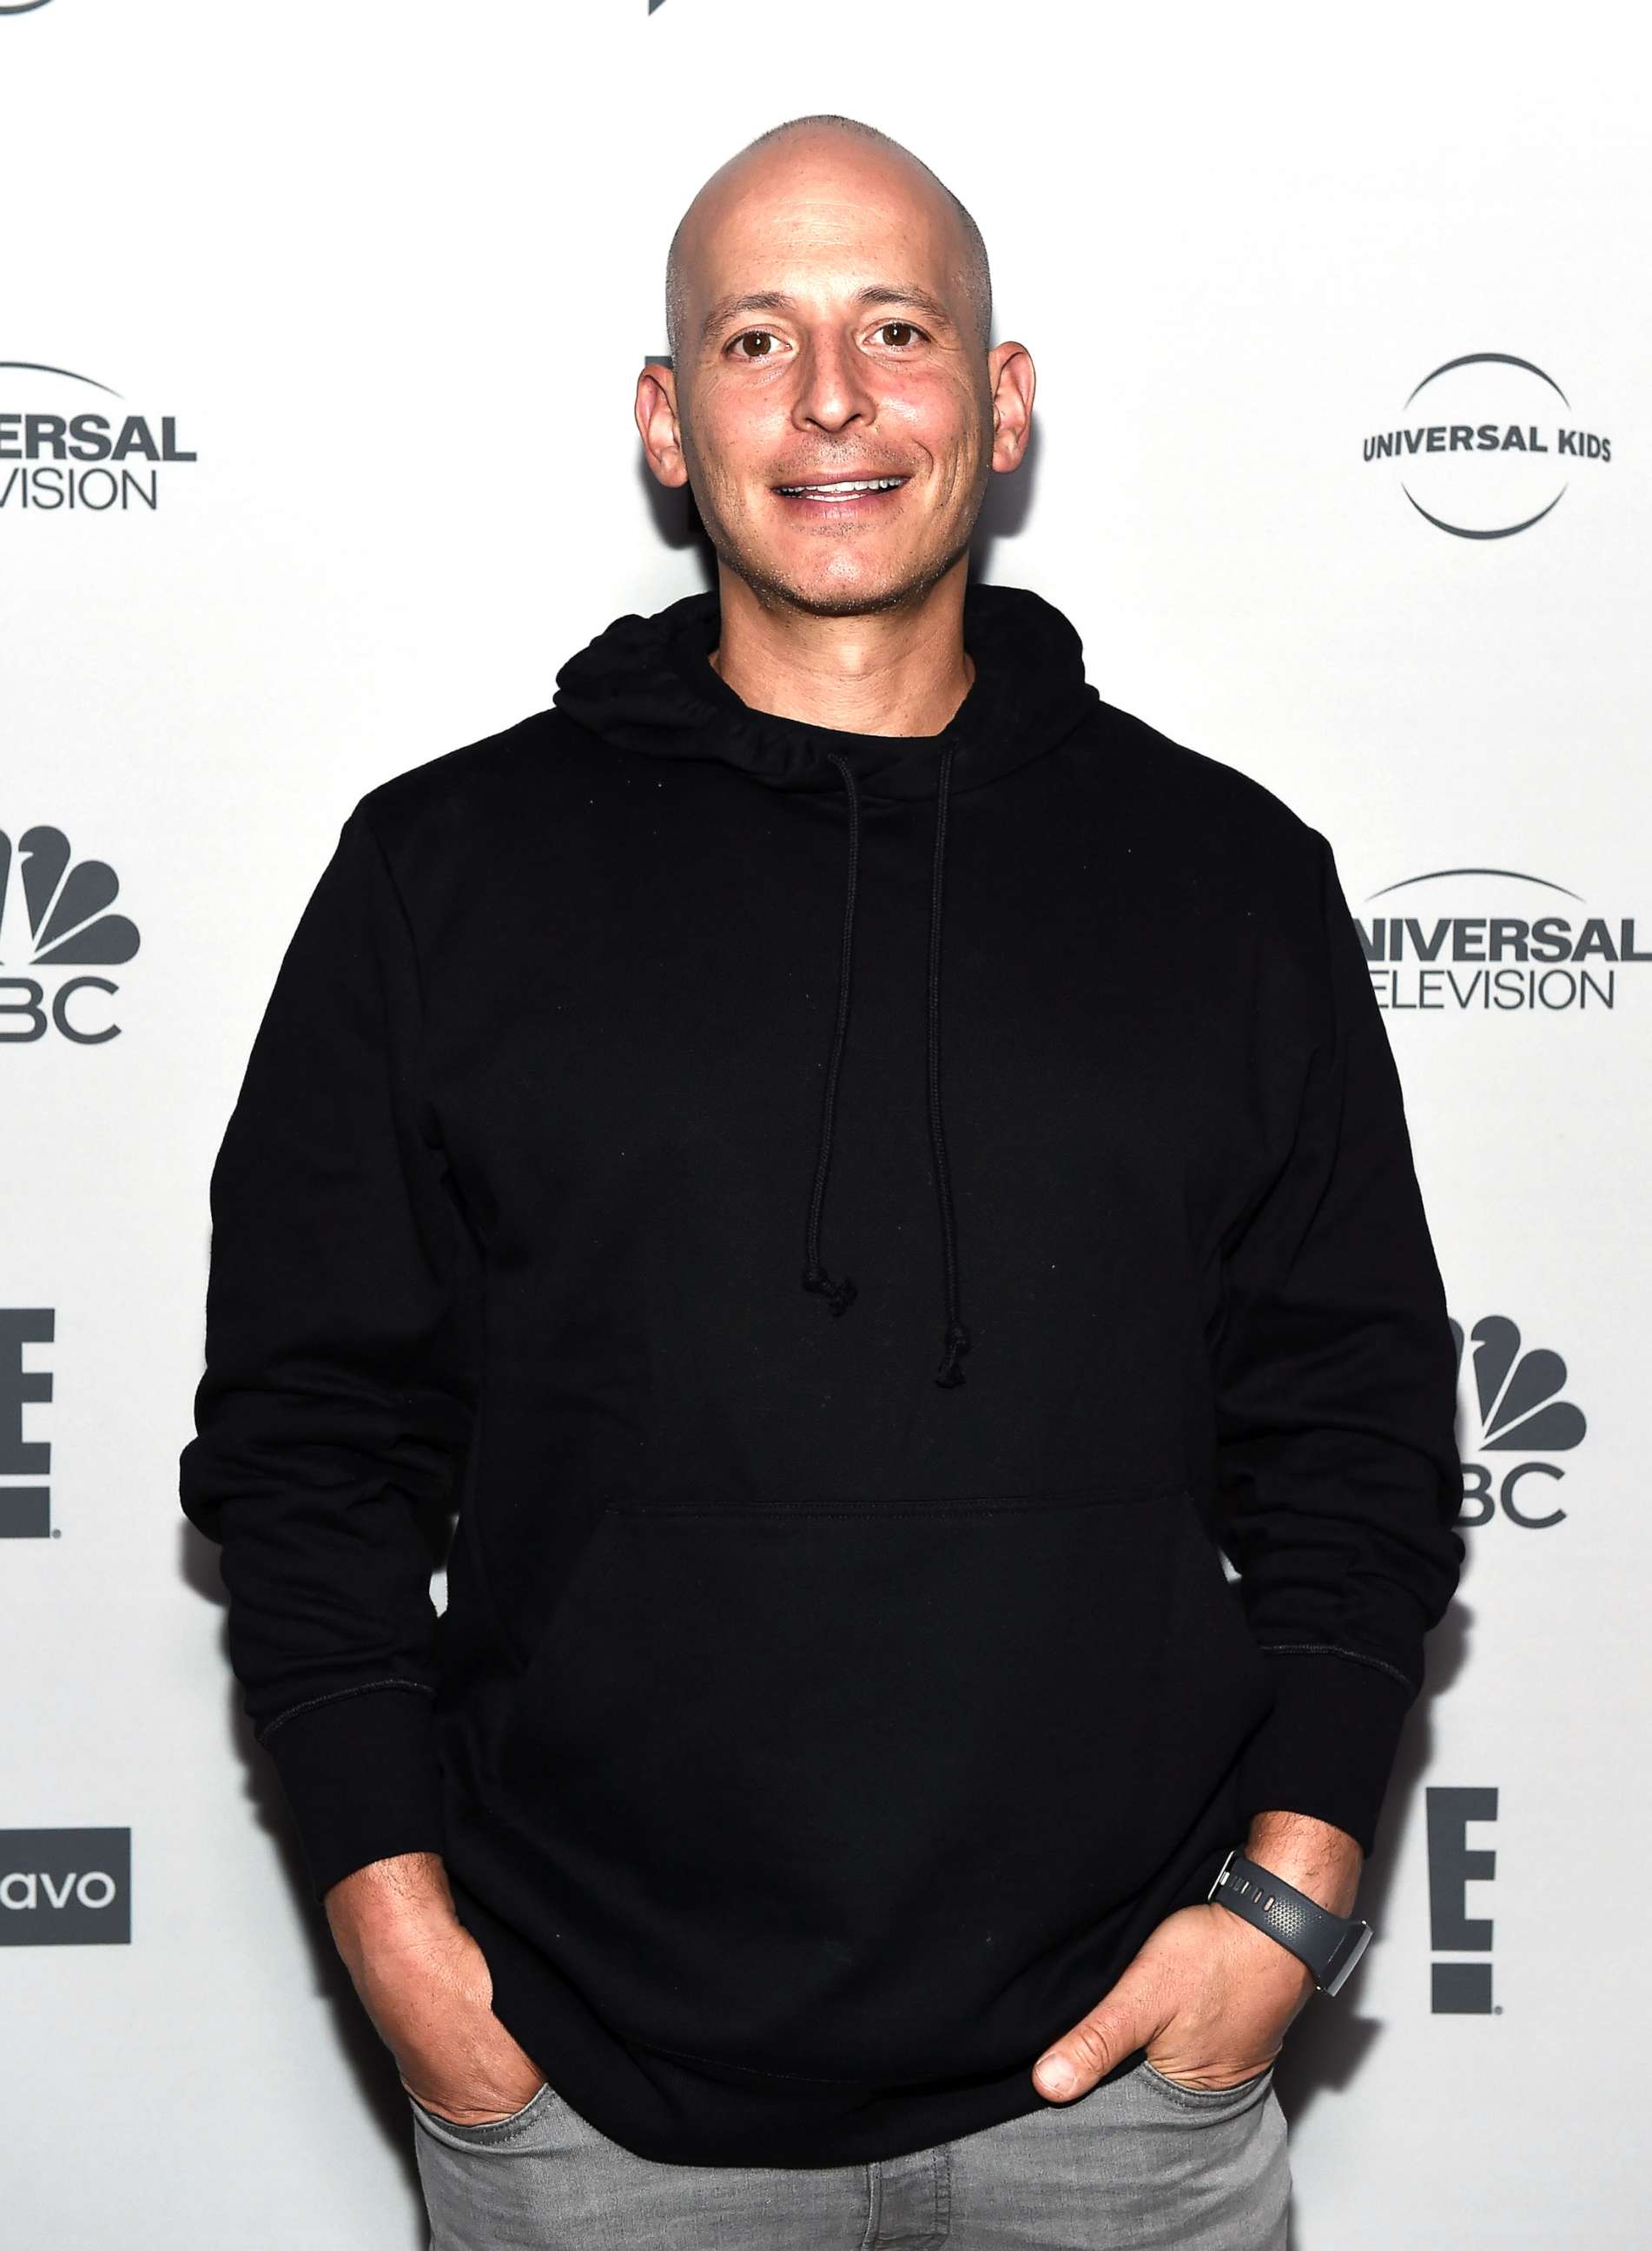 PHOTO: Celebrity fitness trainer Harley Pasternak arrives at NBCUniversal's Press Junket at Beauty & Essex, Nov. 13, 2017 in Los Angeles.